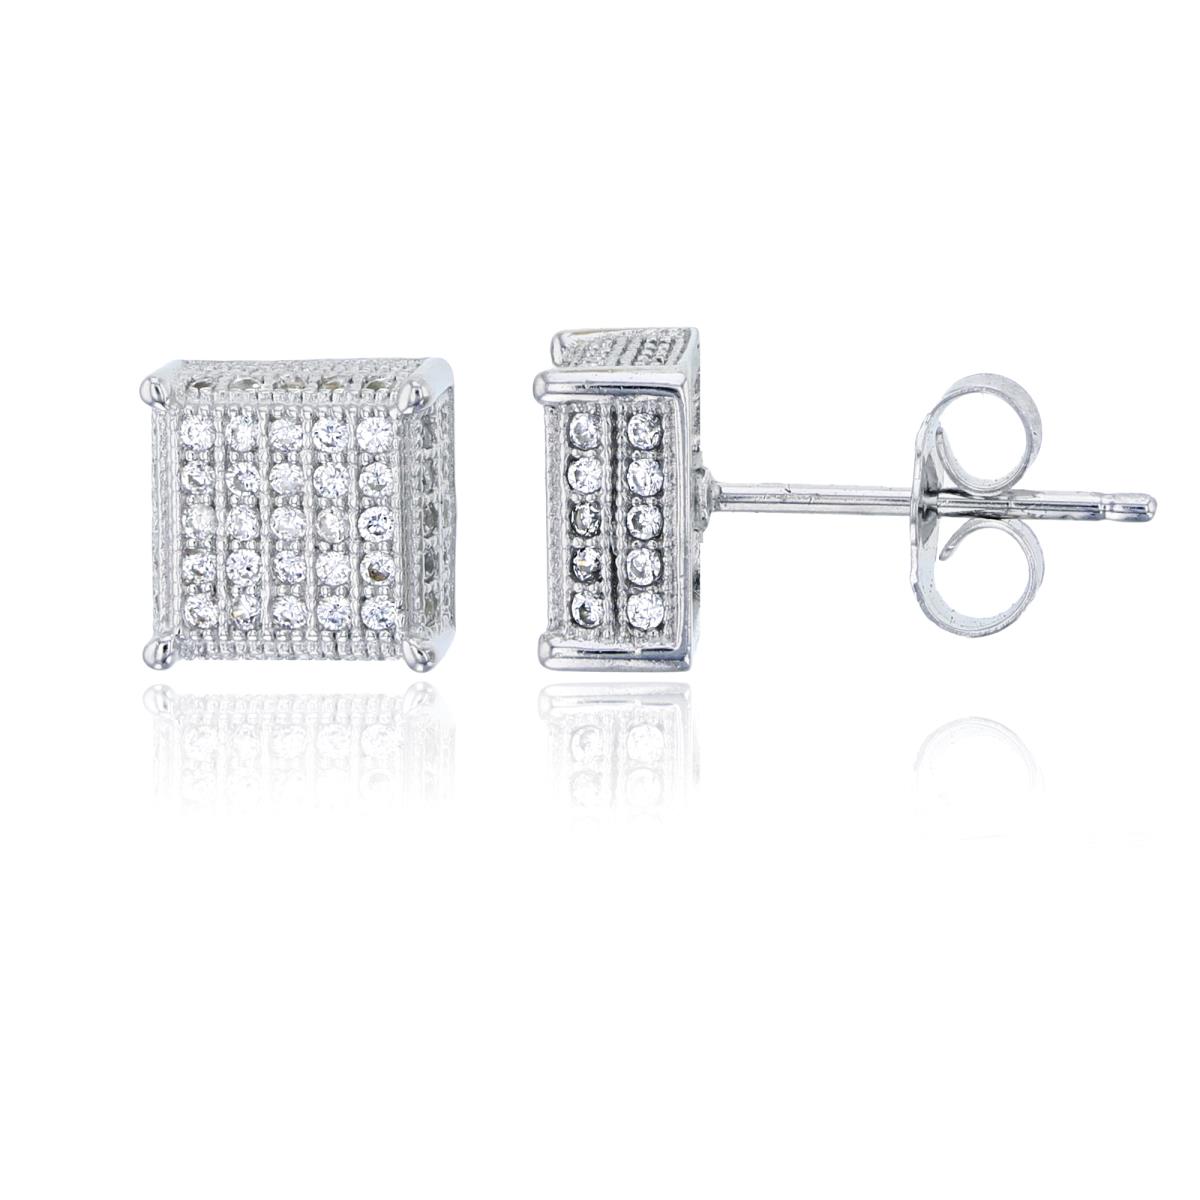 Sterling Silver Rdodium 8.3x8.3mm Micropave Square 3D Stud Earring